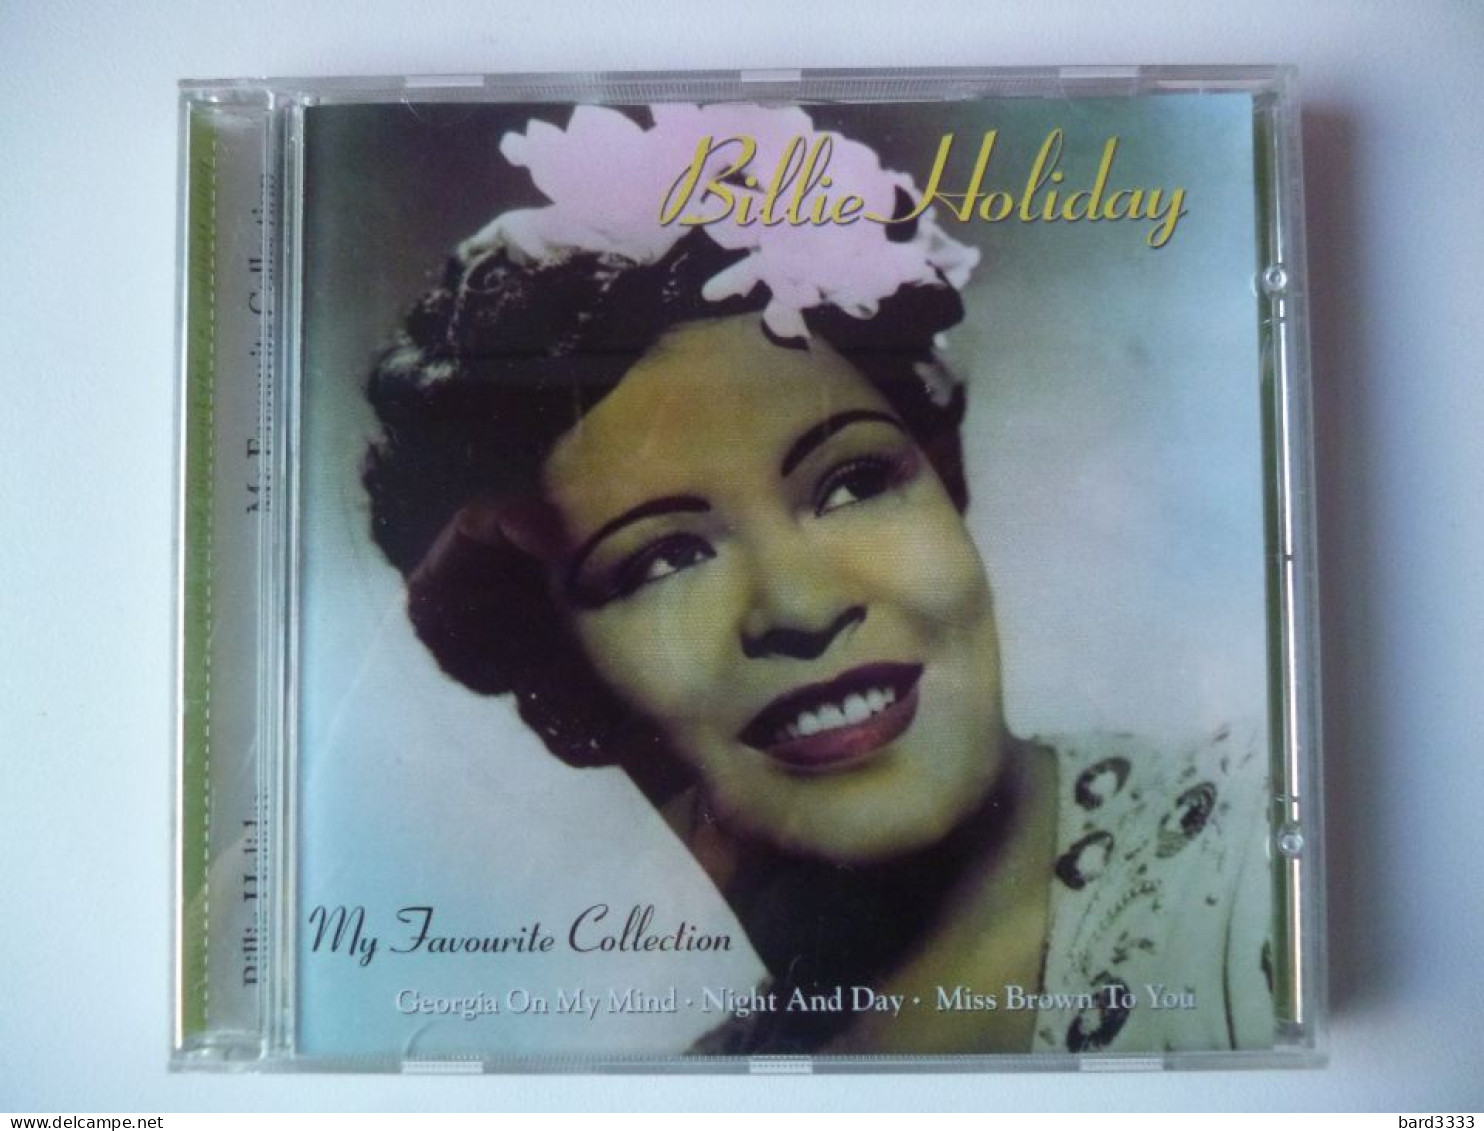 CD Billie Holiday - Complete Collections